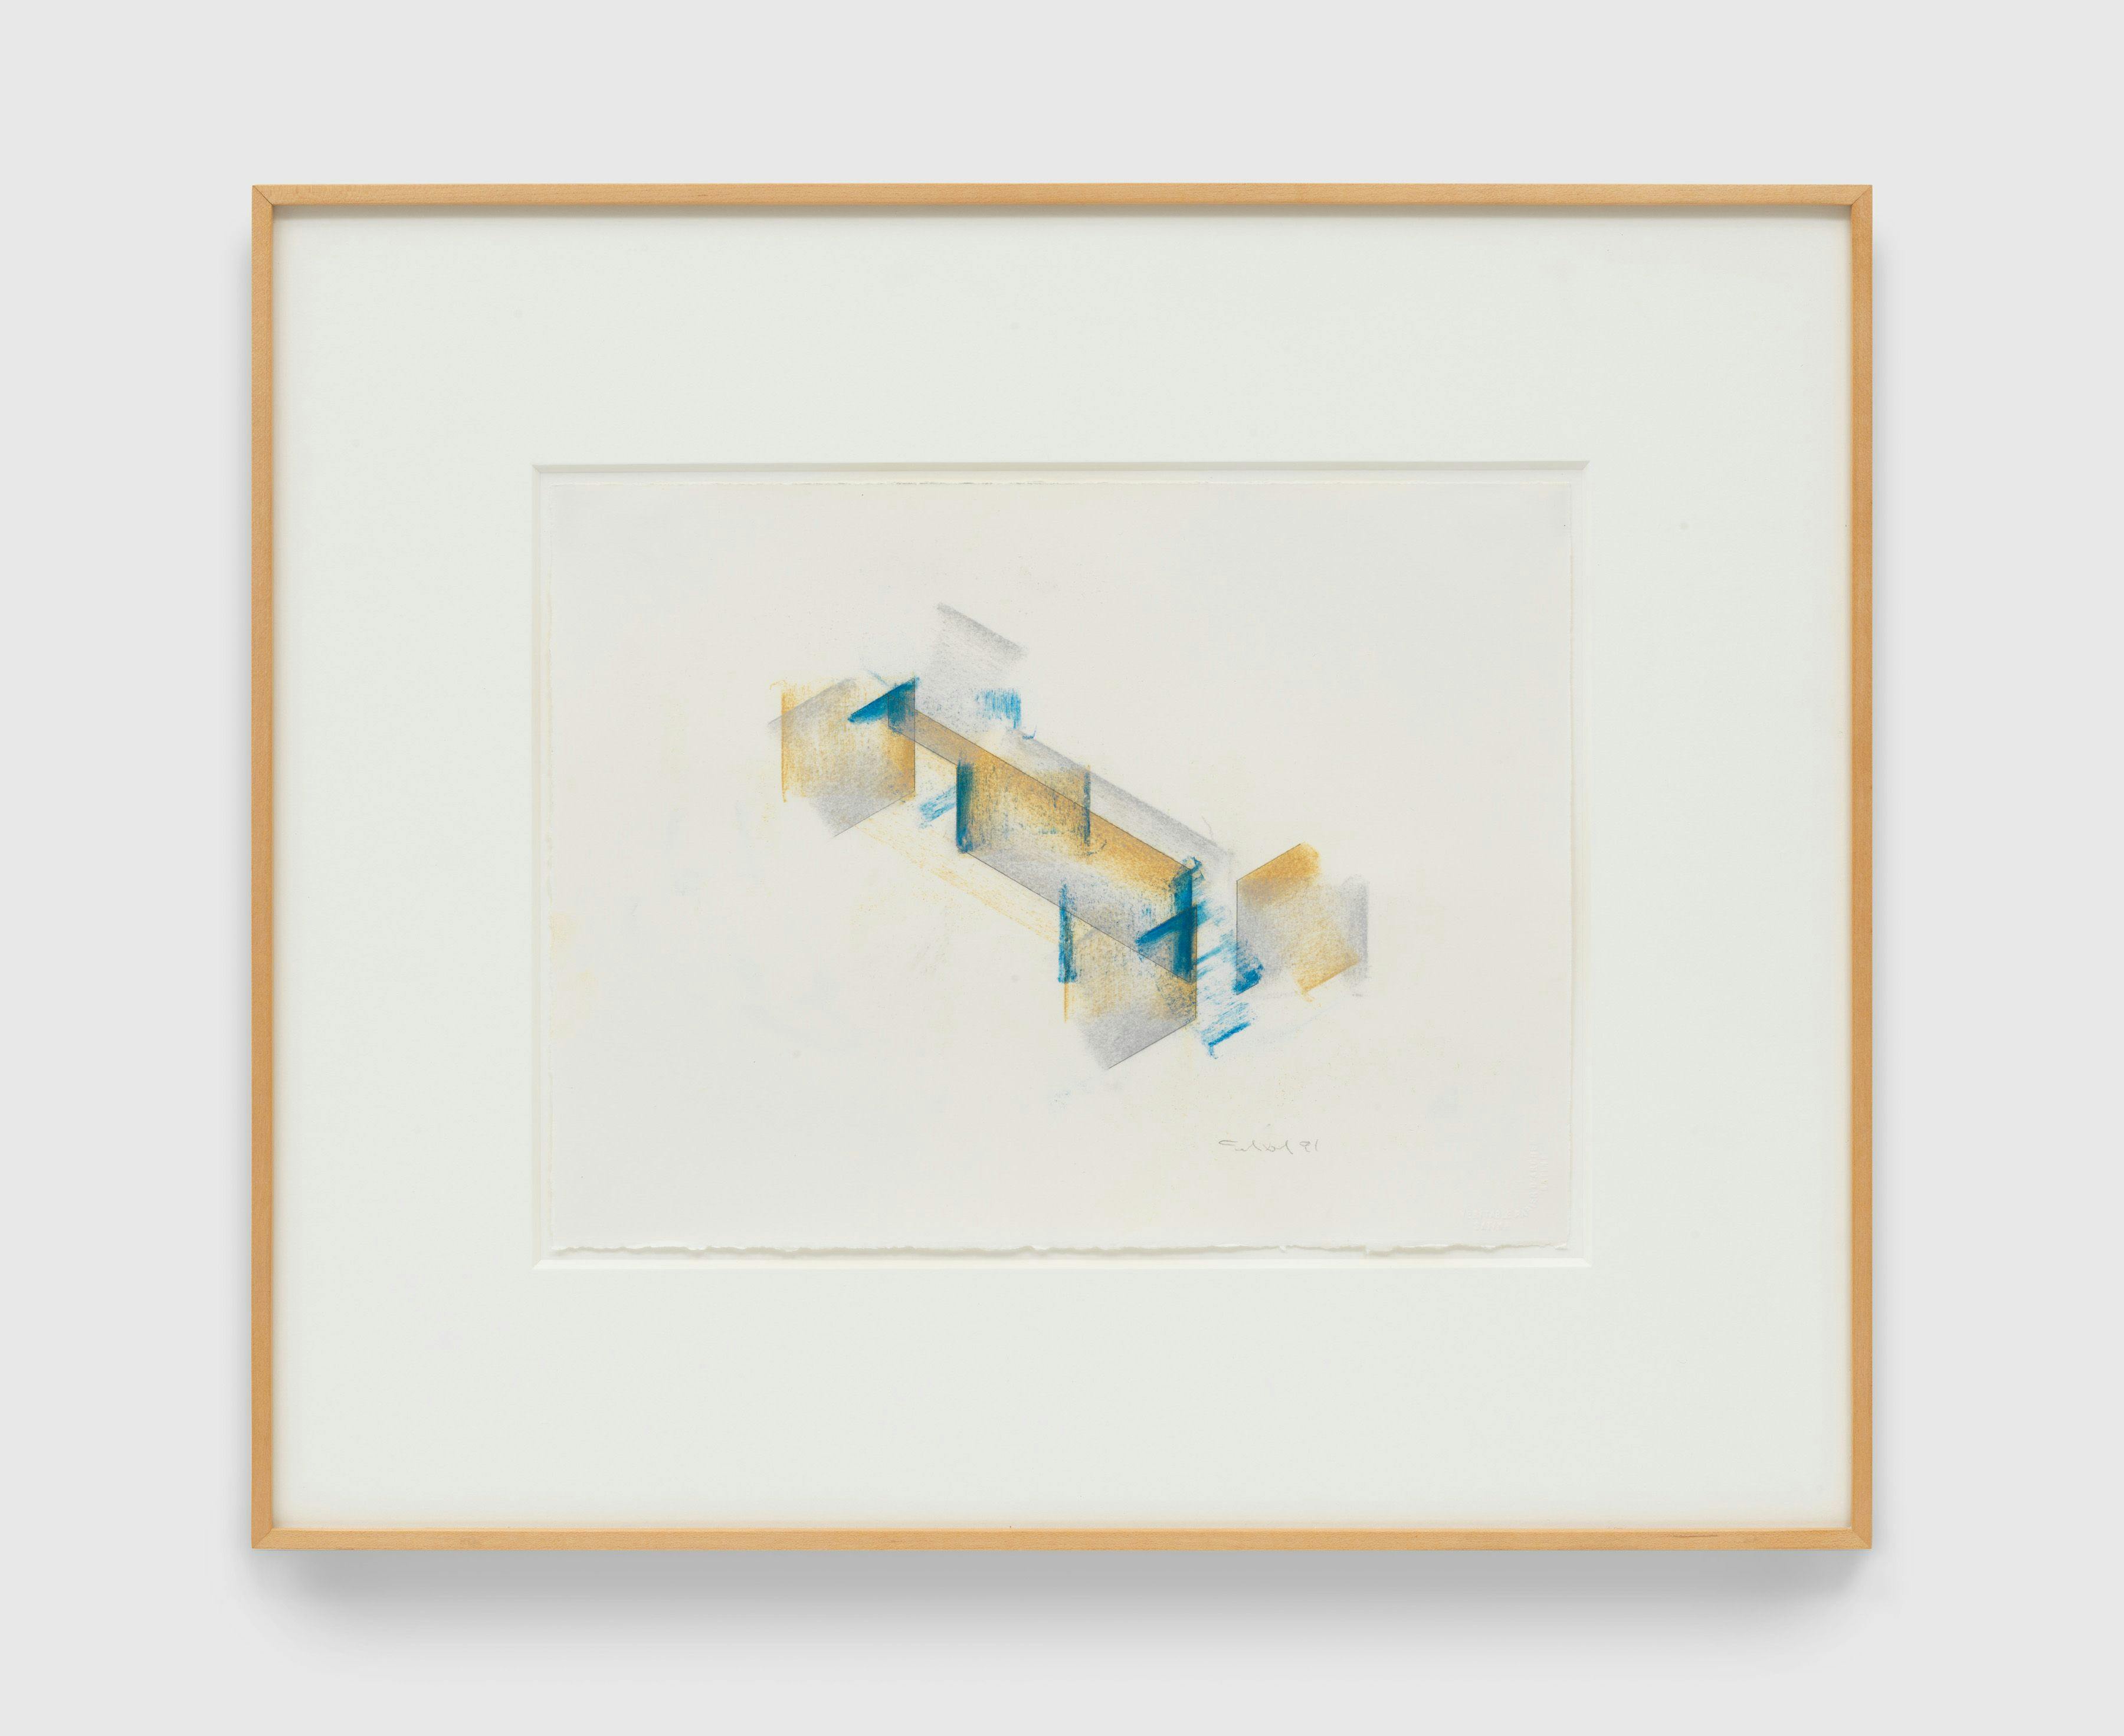 A pastel and graphite on paper artwork by Fred Sandback, called Untitled, dated 1991.